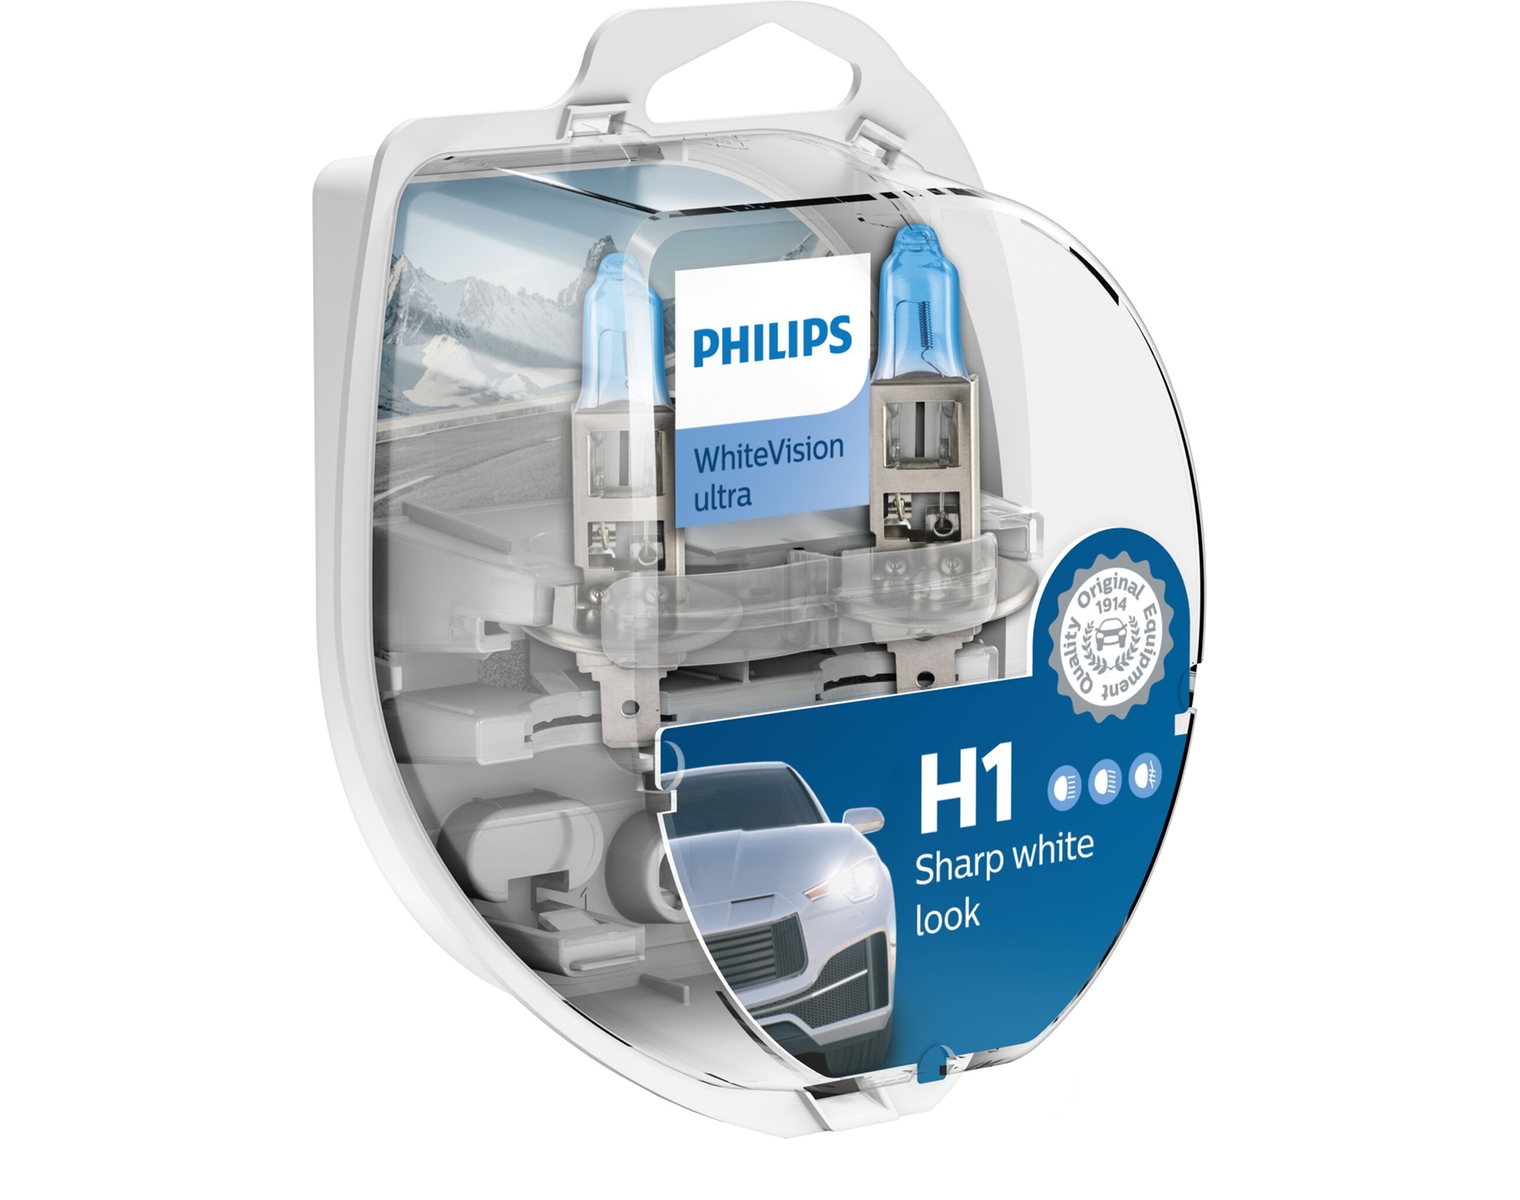 PHILIPS ampoule auto H1/W5W WhiteVision ultra, 12258WVUSM, 12 V 55